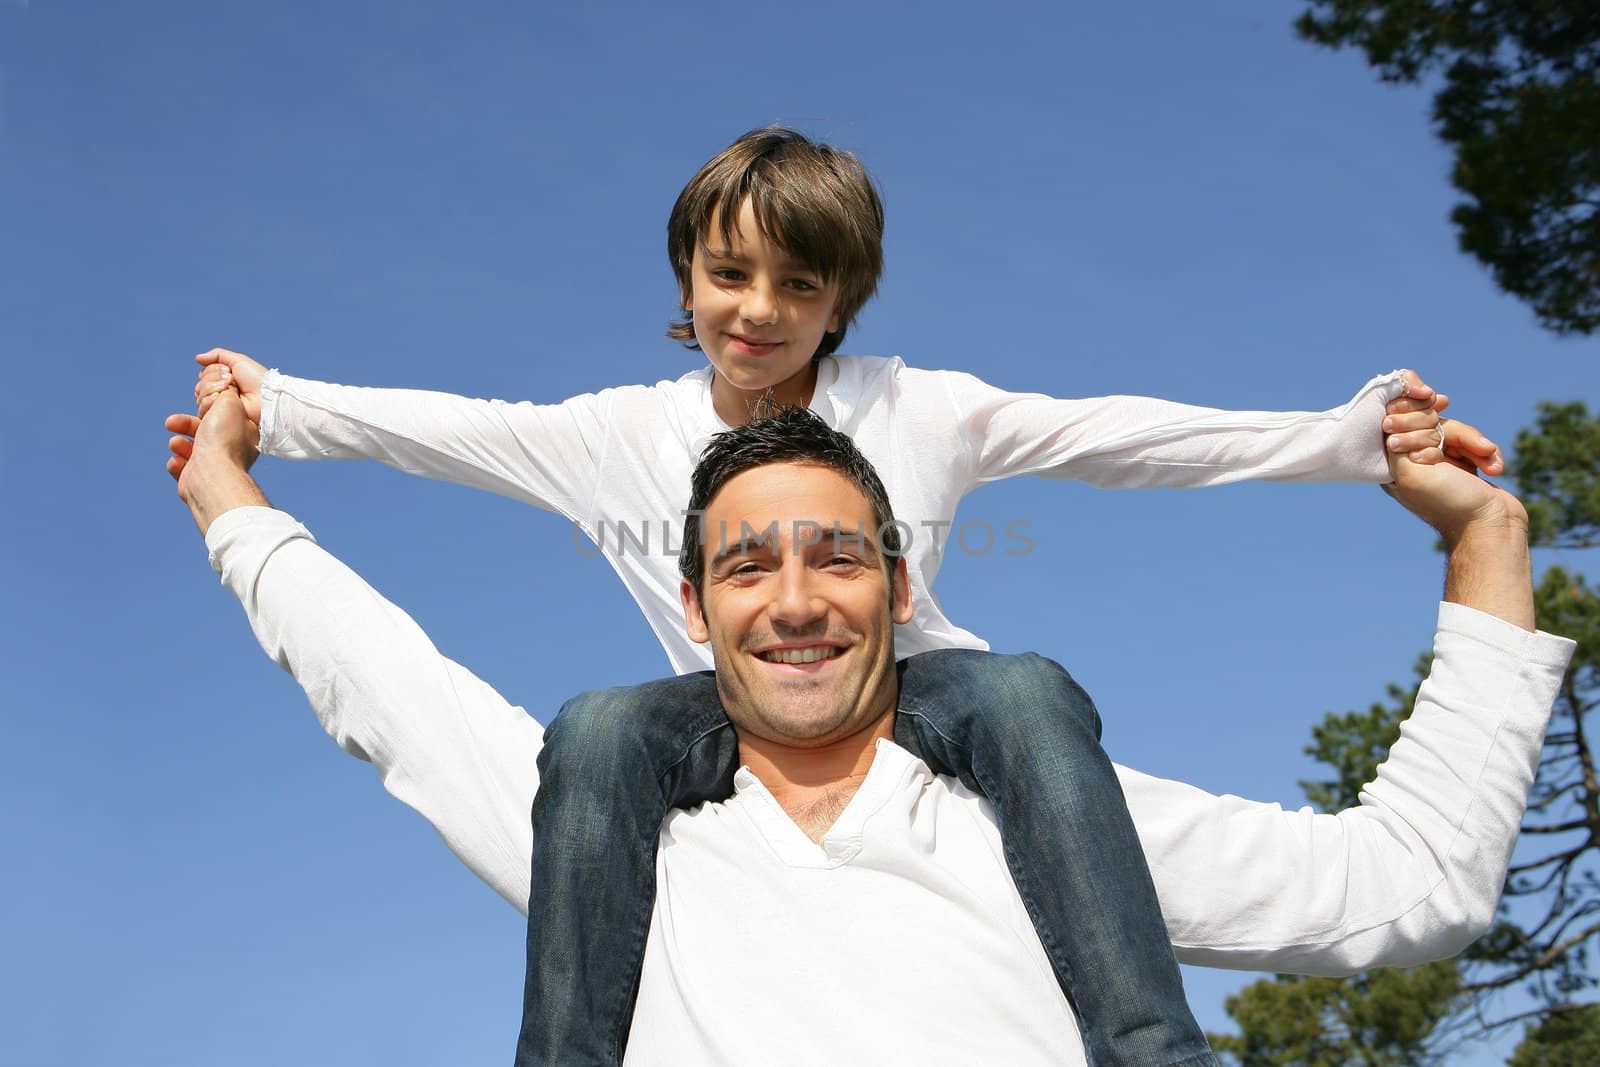 Child riding on his father's shoulders by phovoir